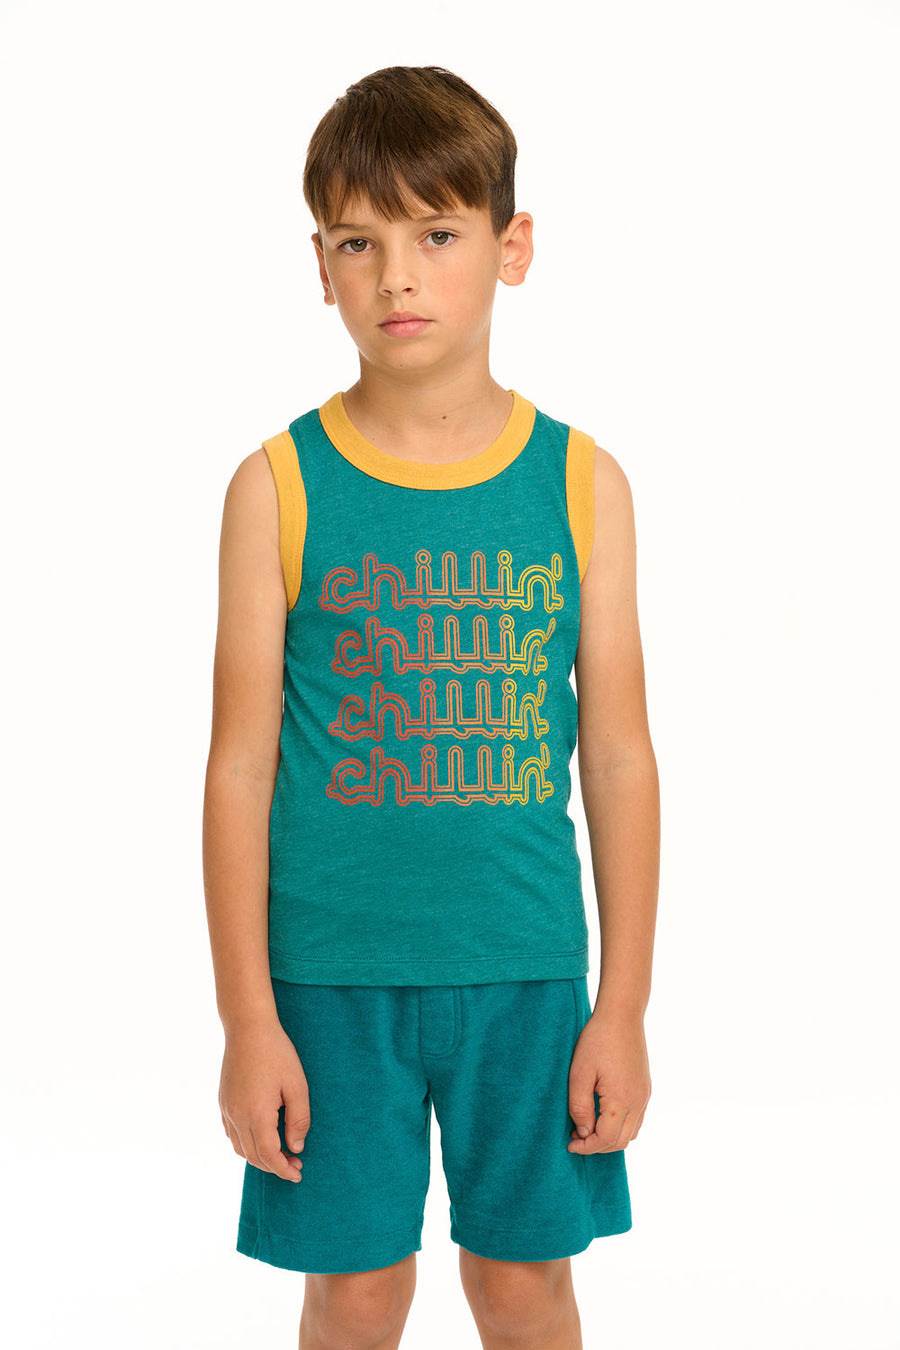 Chillin' Recycled Vintage Jersey Tank BOYS chaserbrand